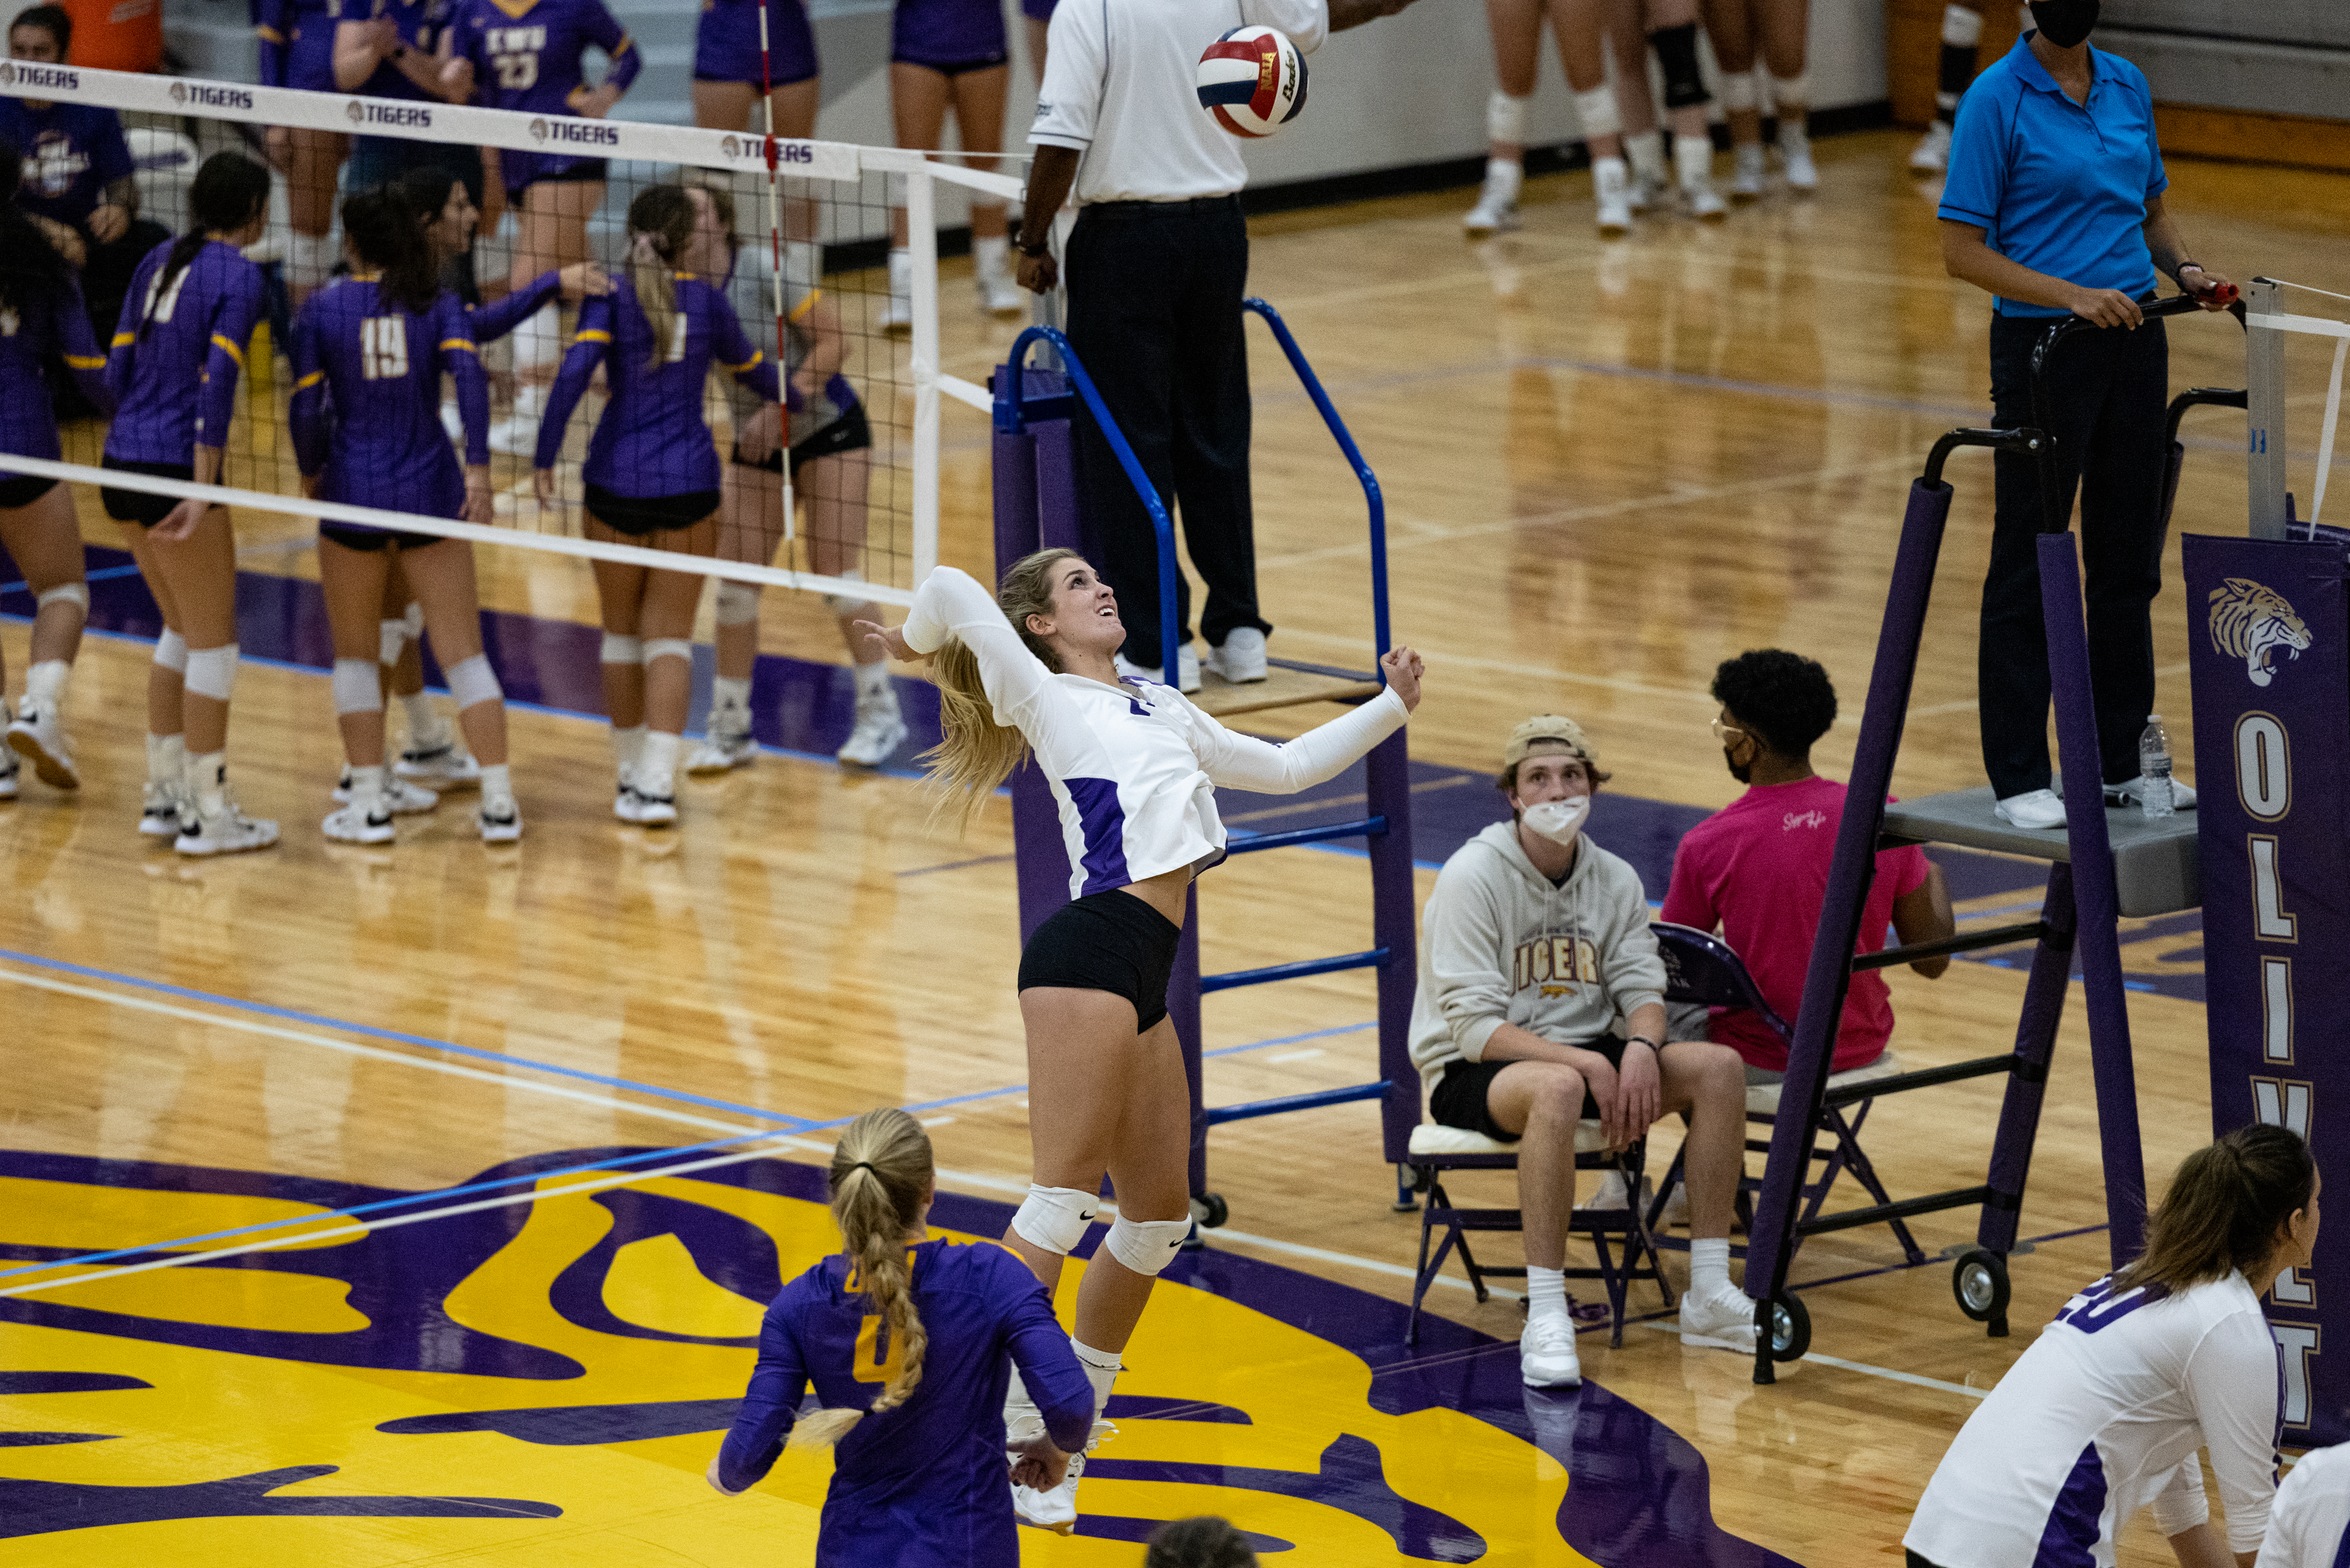 TIGERS DROP FINAL TWO MATCHES OF BELLEVUE TOURNAMENT